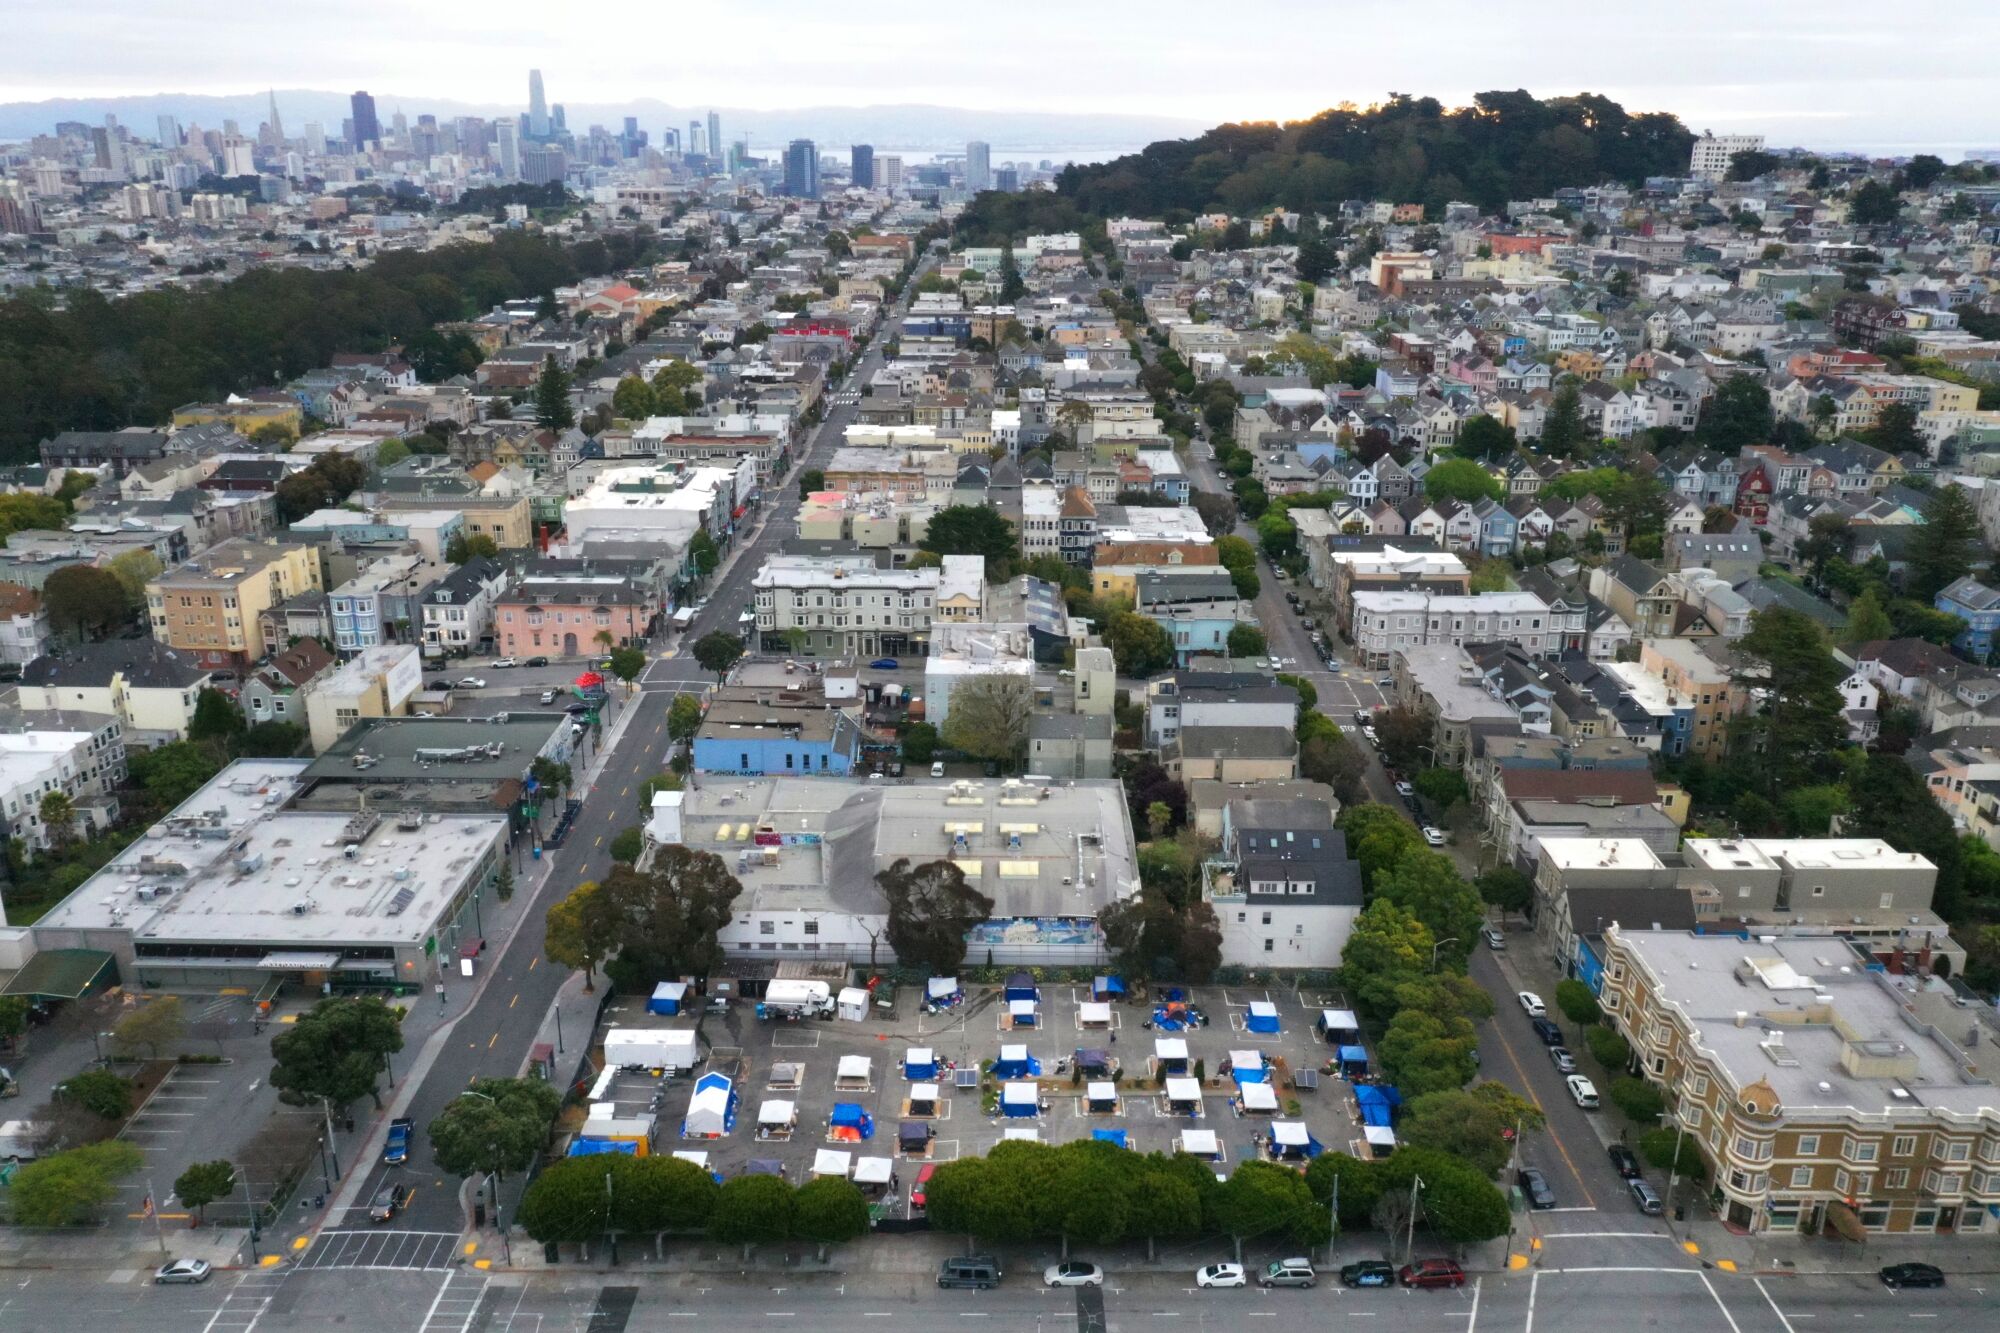 An aerial view of San Francisco shows a block with tents